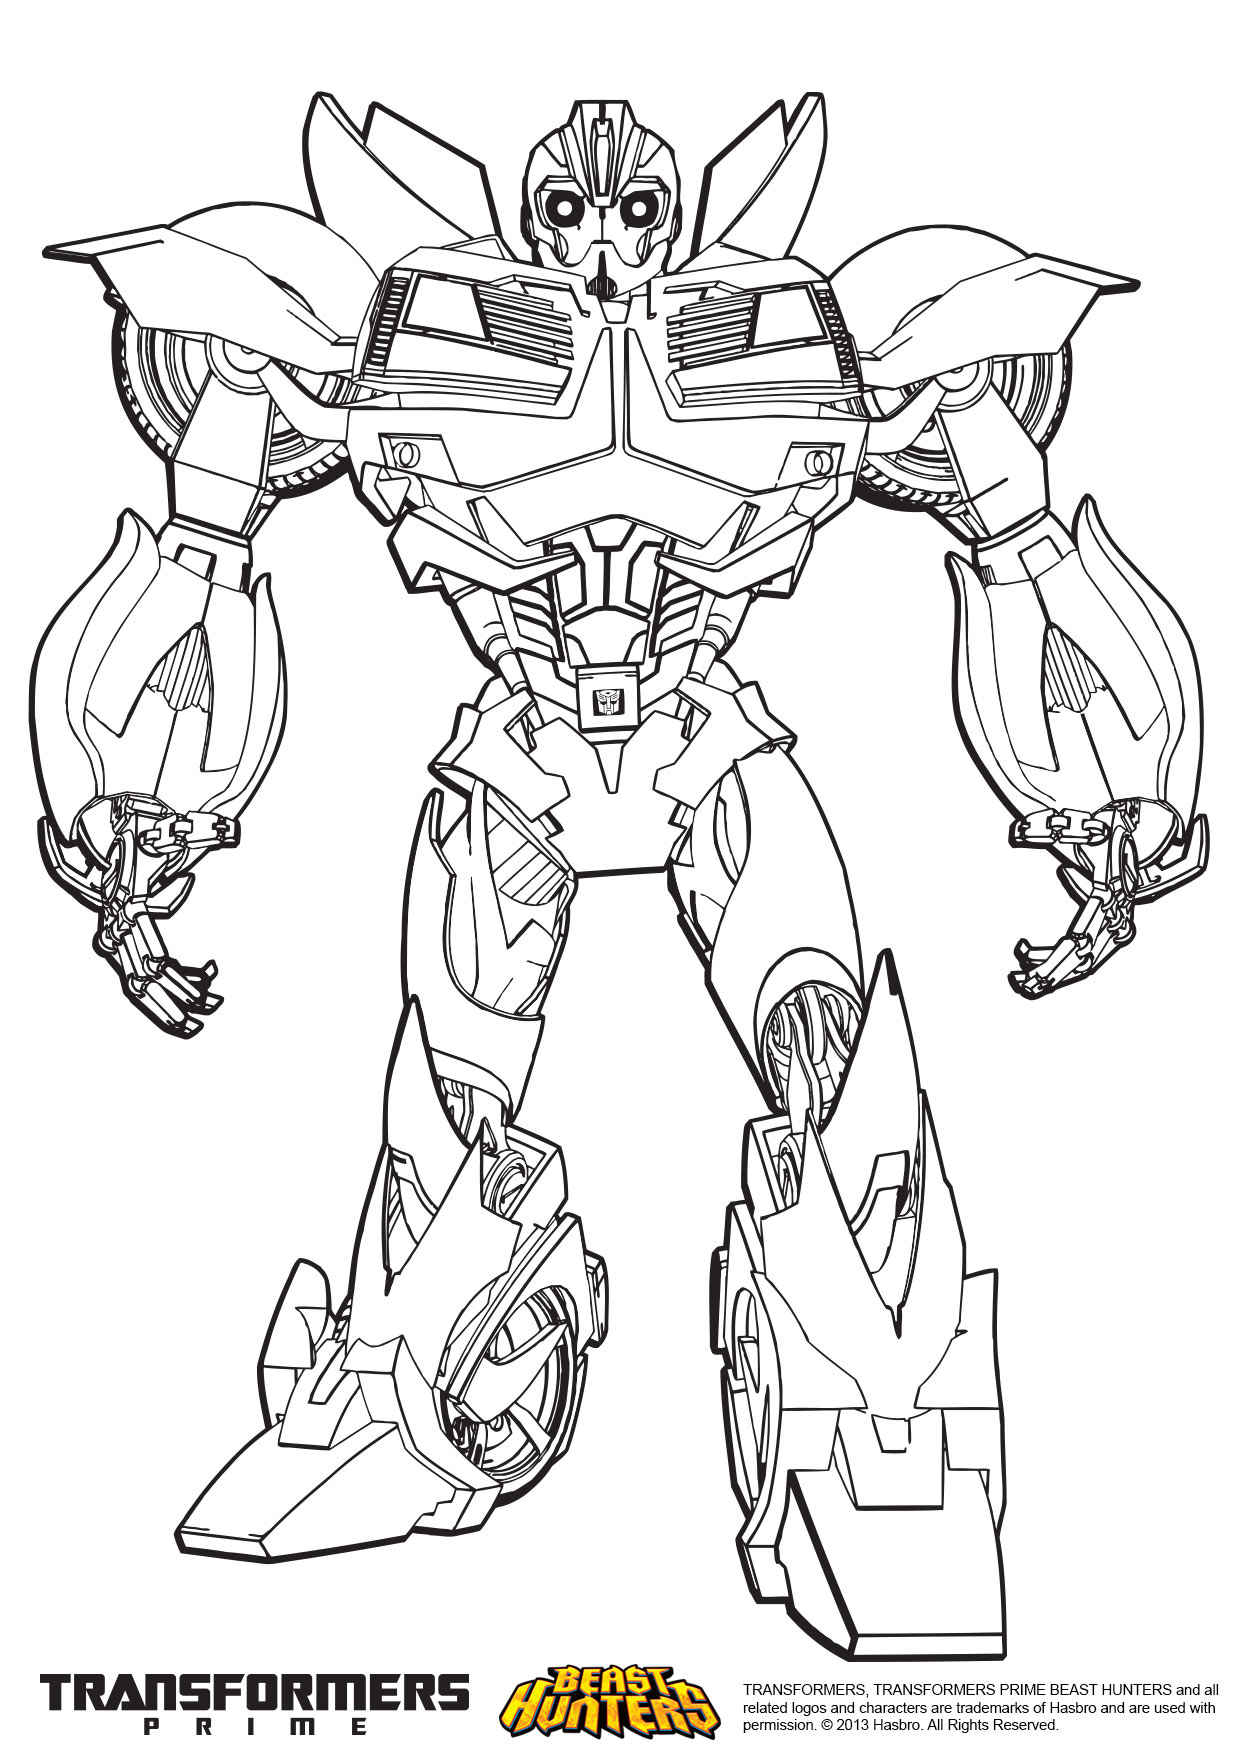 Transformers Bumblebee Coloring Pages for Kids Coloring